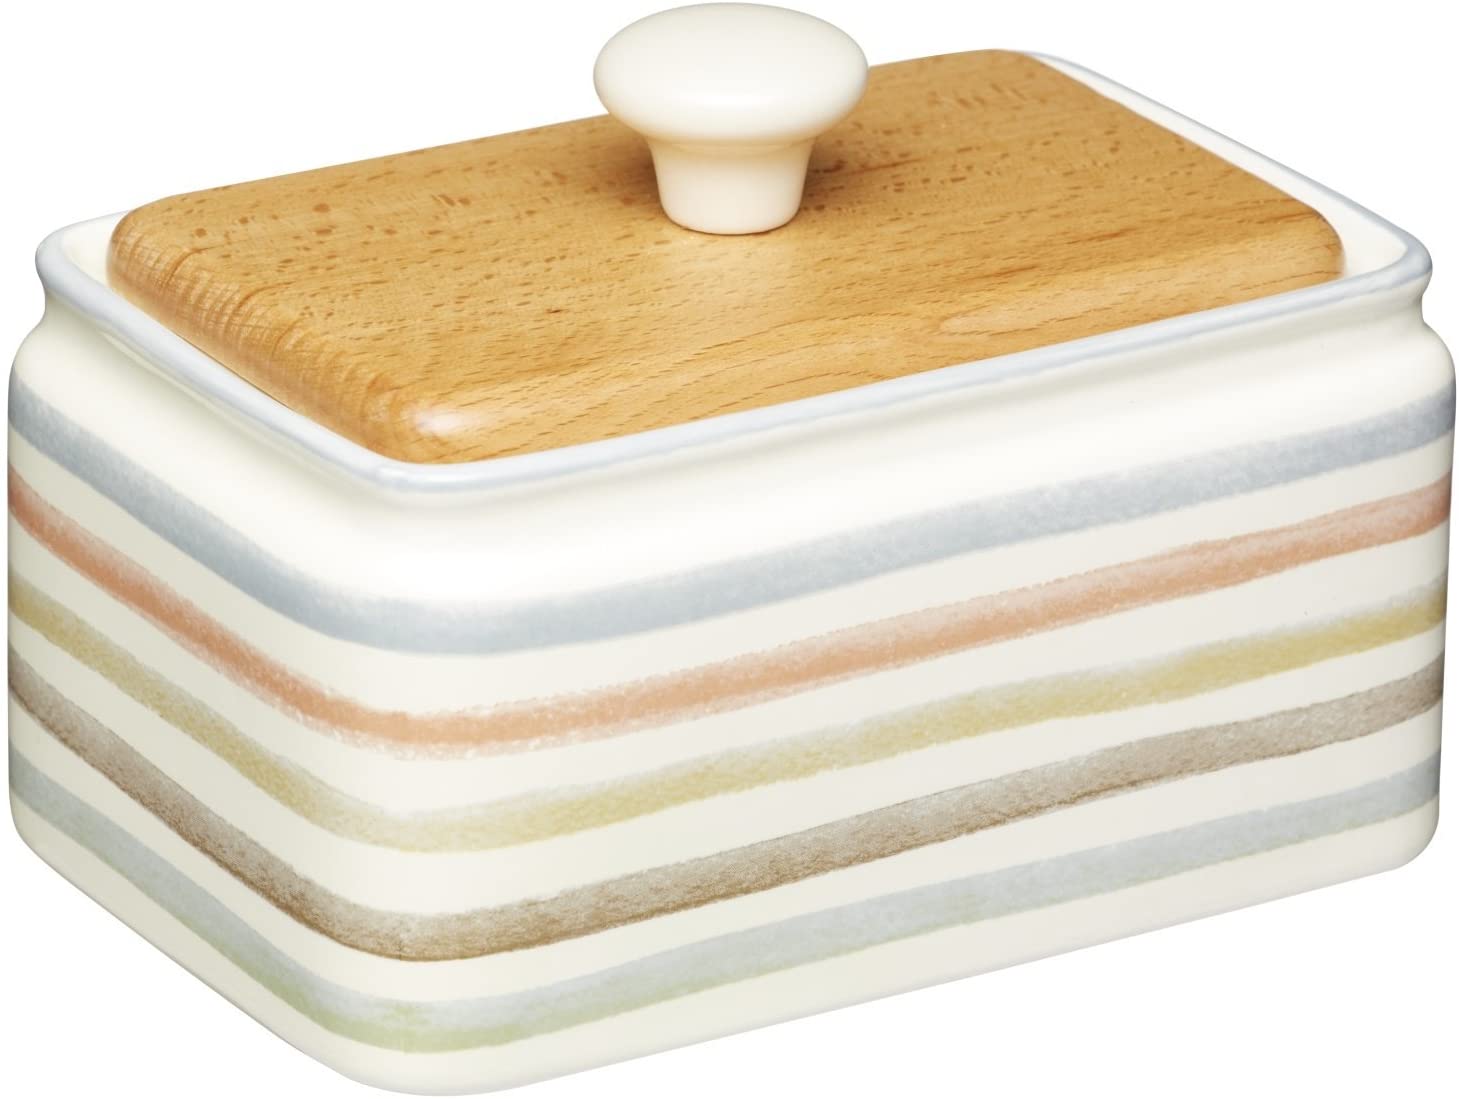 KitchenCraft Kitchen Craft Butter dish with lid made of ceramic/beech wood, multicoloured, 15 x 11 x 9.5 cm, 2 units